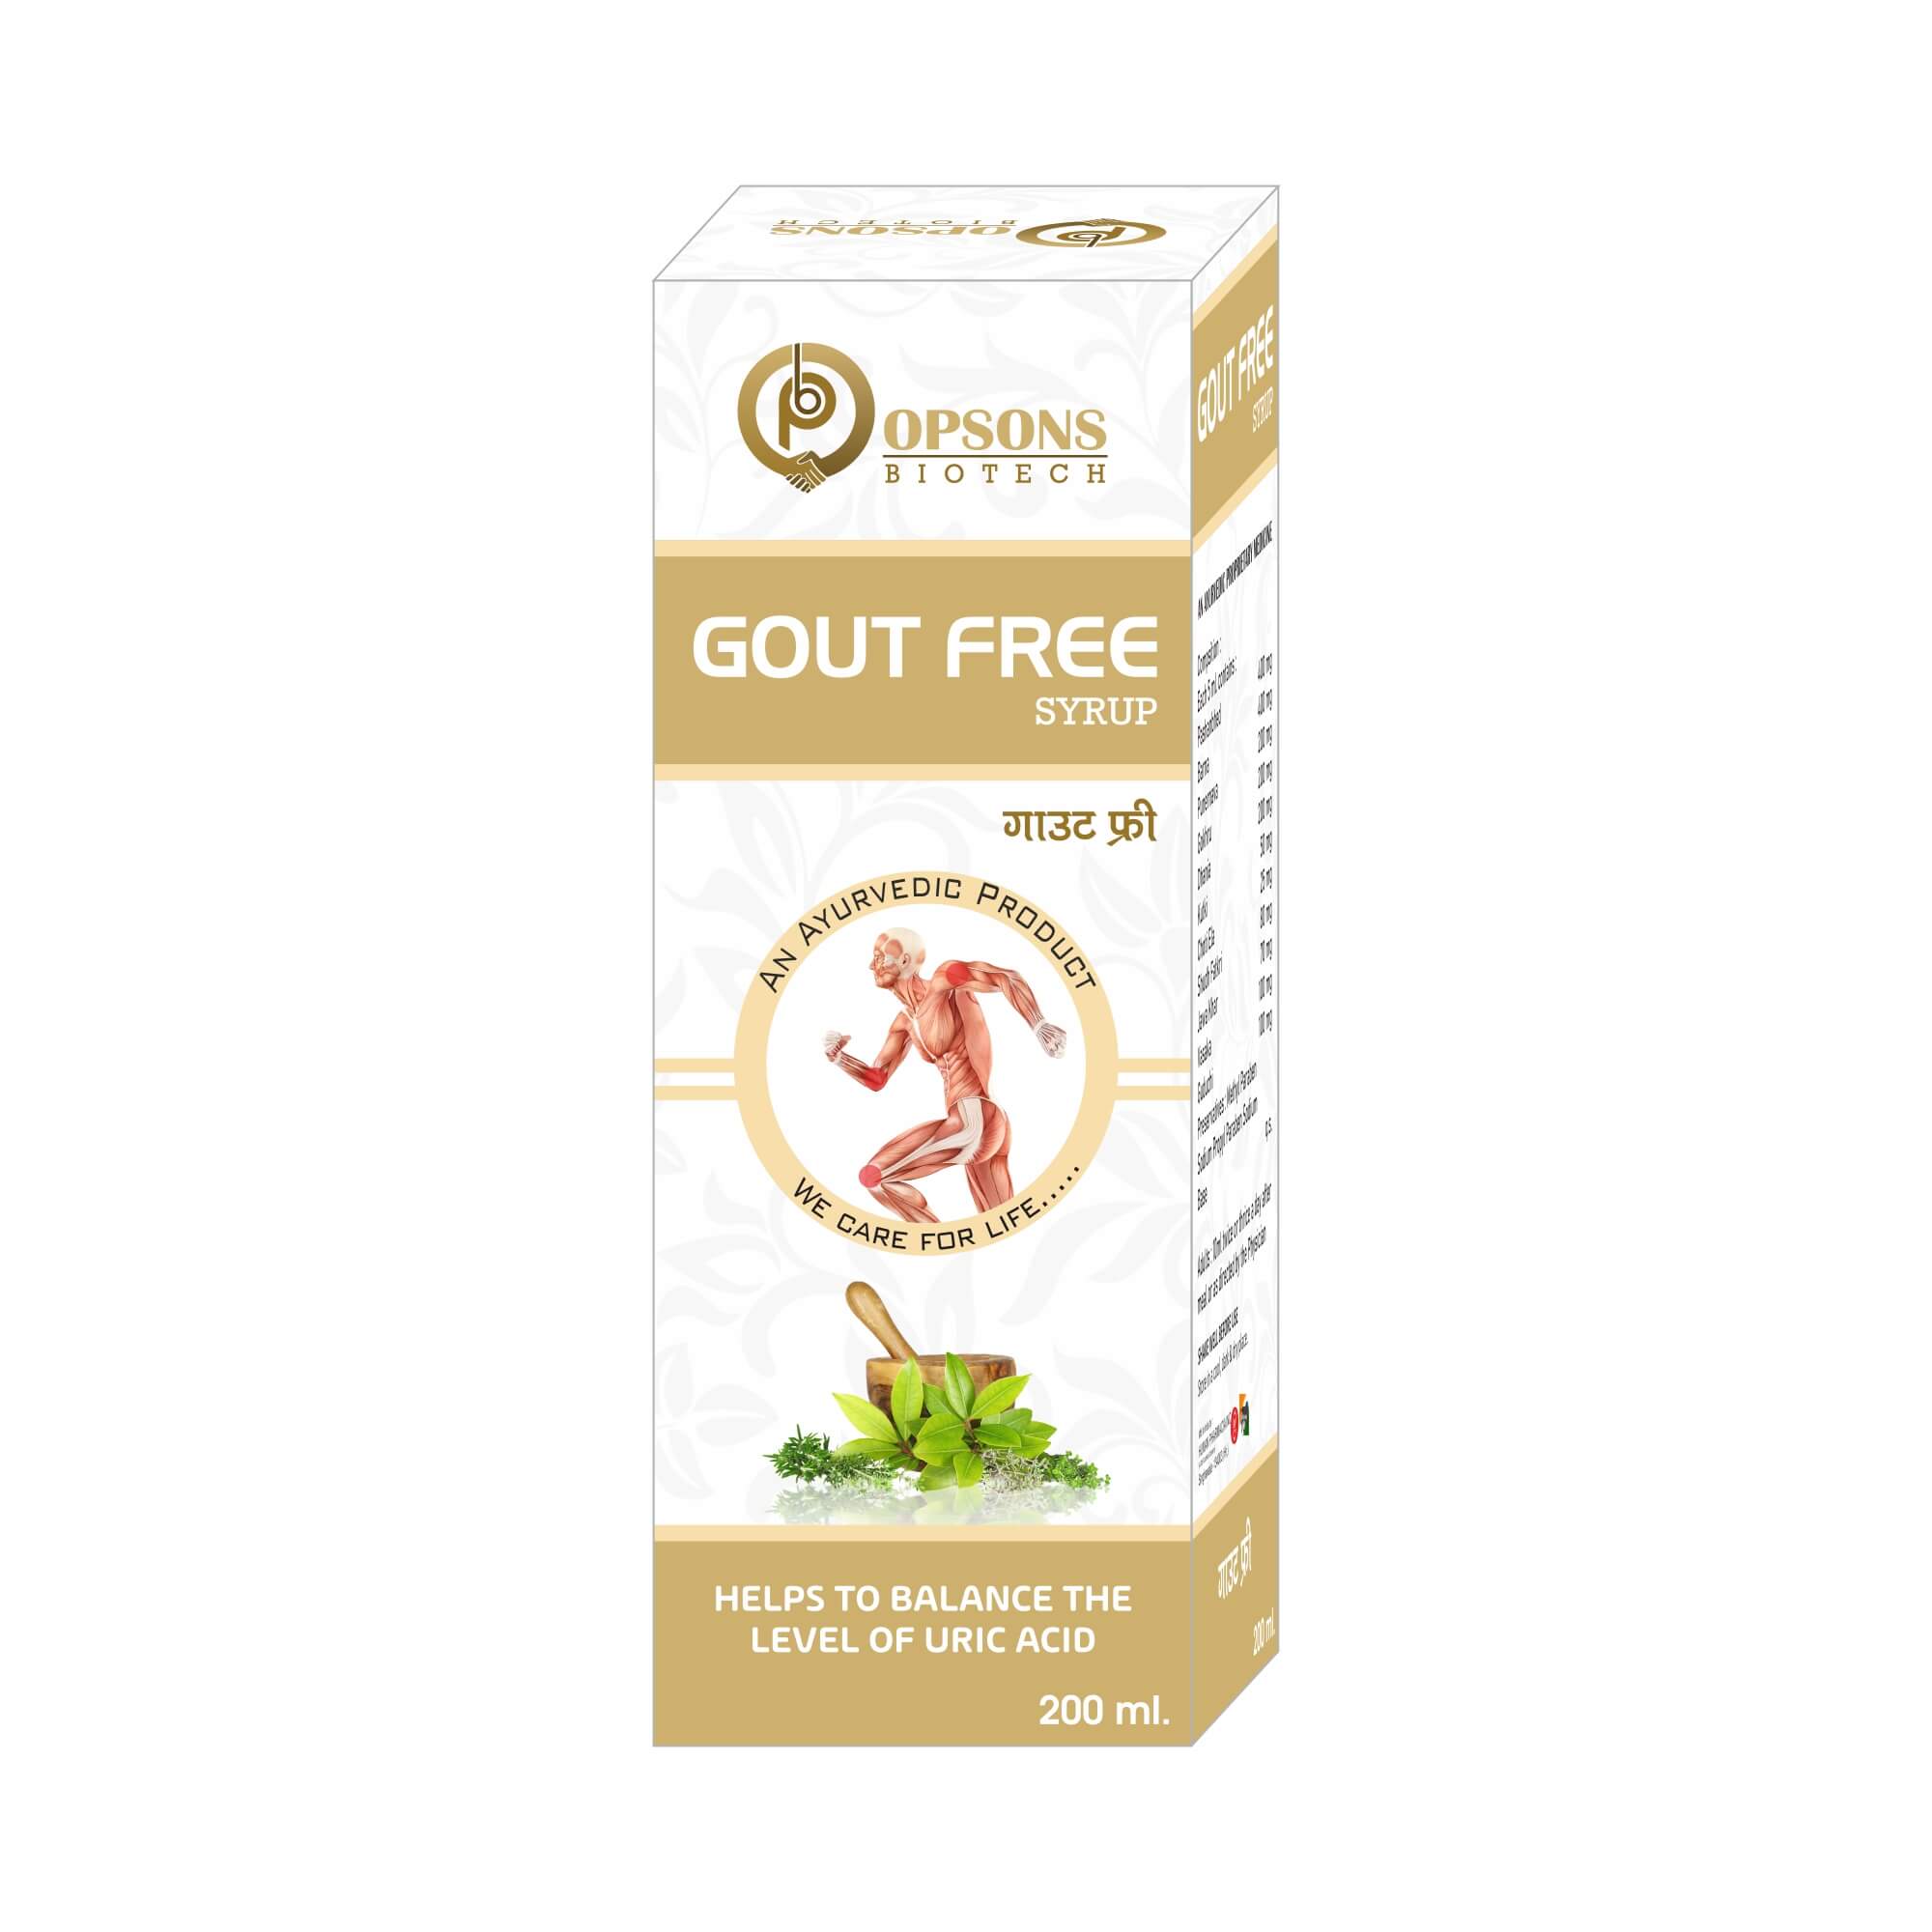 Product Name: Gout free, Compositions of Gout free are Helps To Balance The Level Of Uric Acid - Opsons Biotech